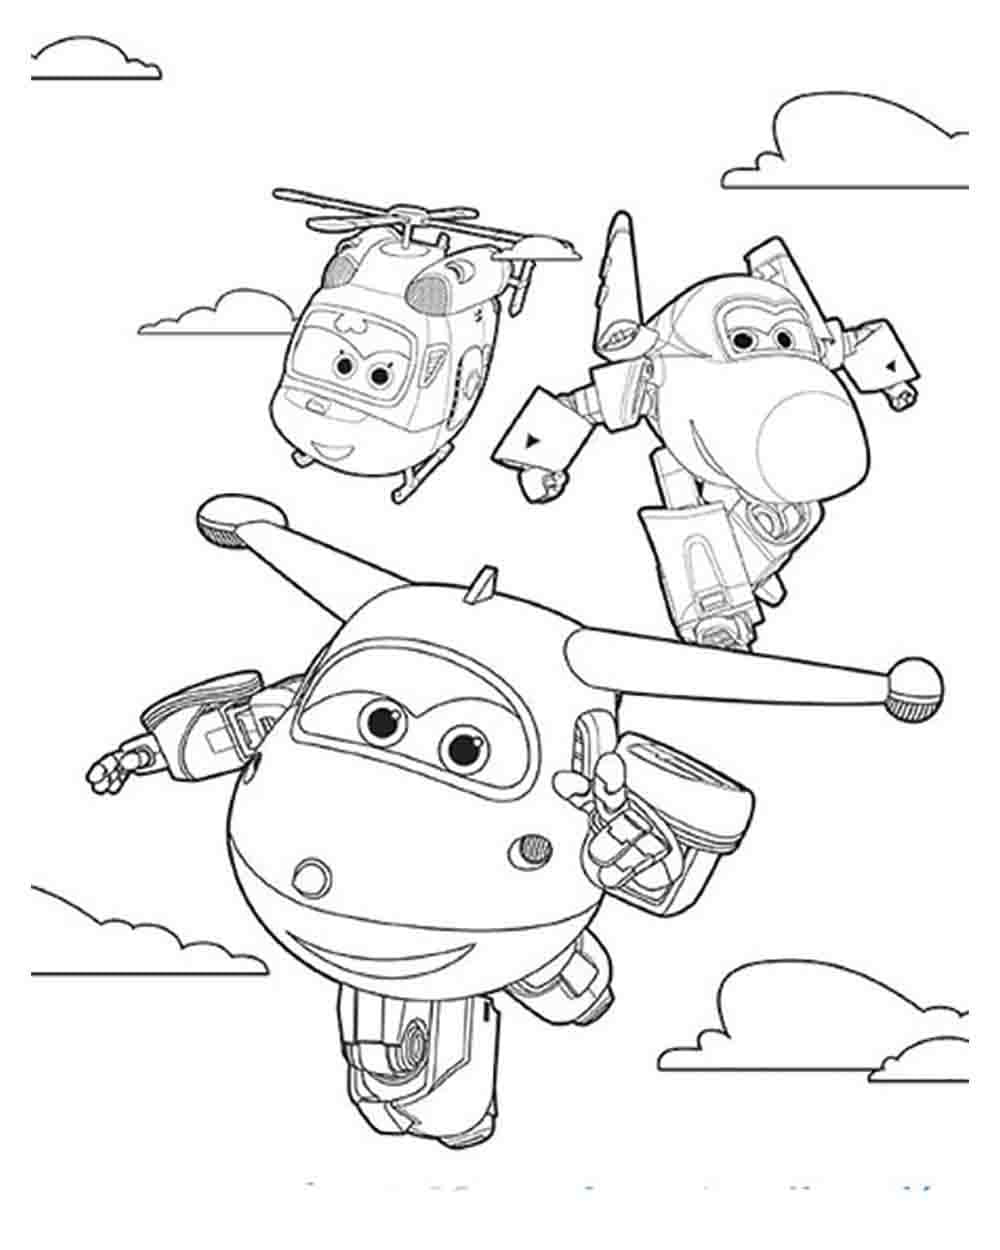 Super Wings Coloring Pages. 